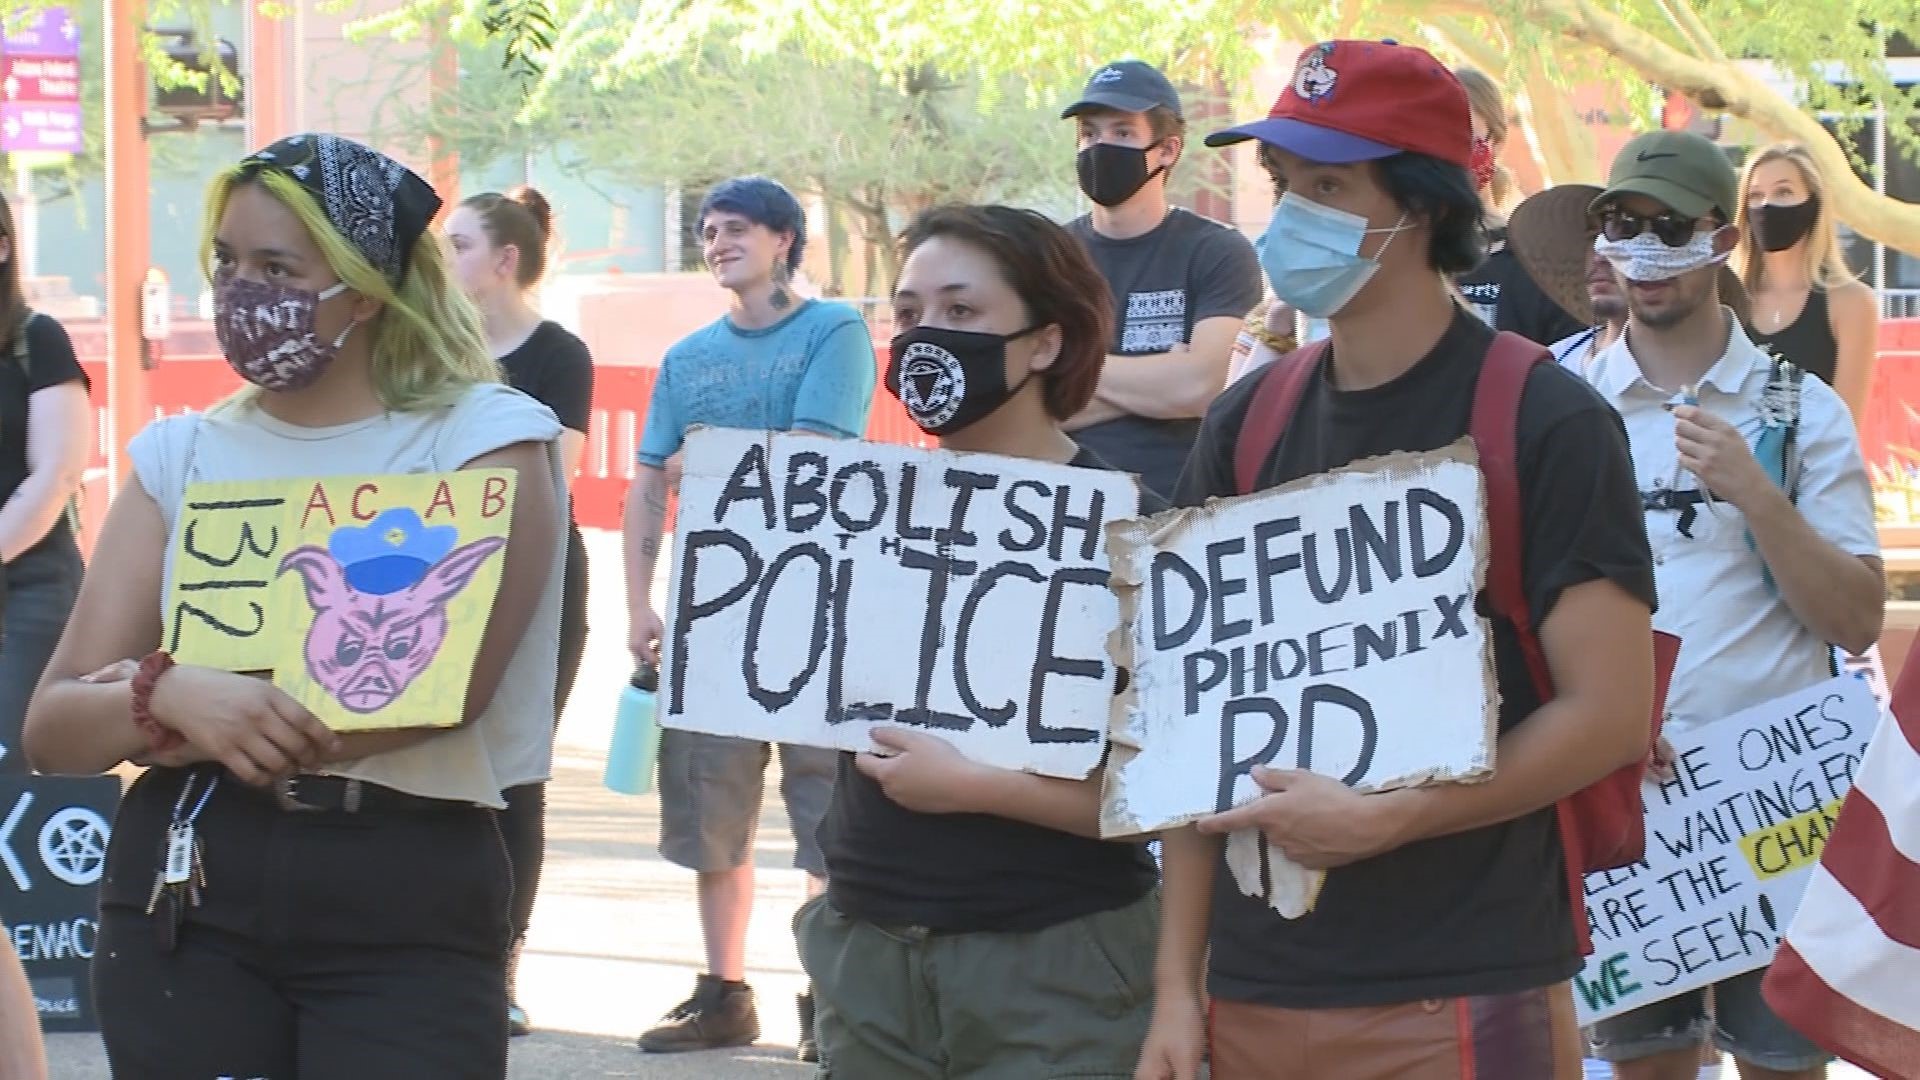 'Defund the police' means the abolishment of departments for some Valley activist groups. The Phoenix Law Enforcement Association (PLEA) says the call is divisive.